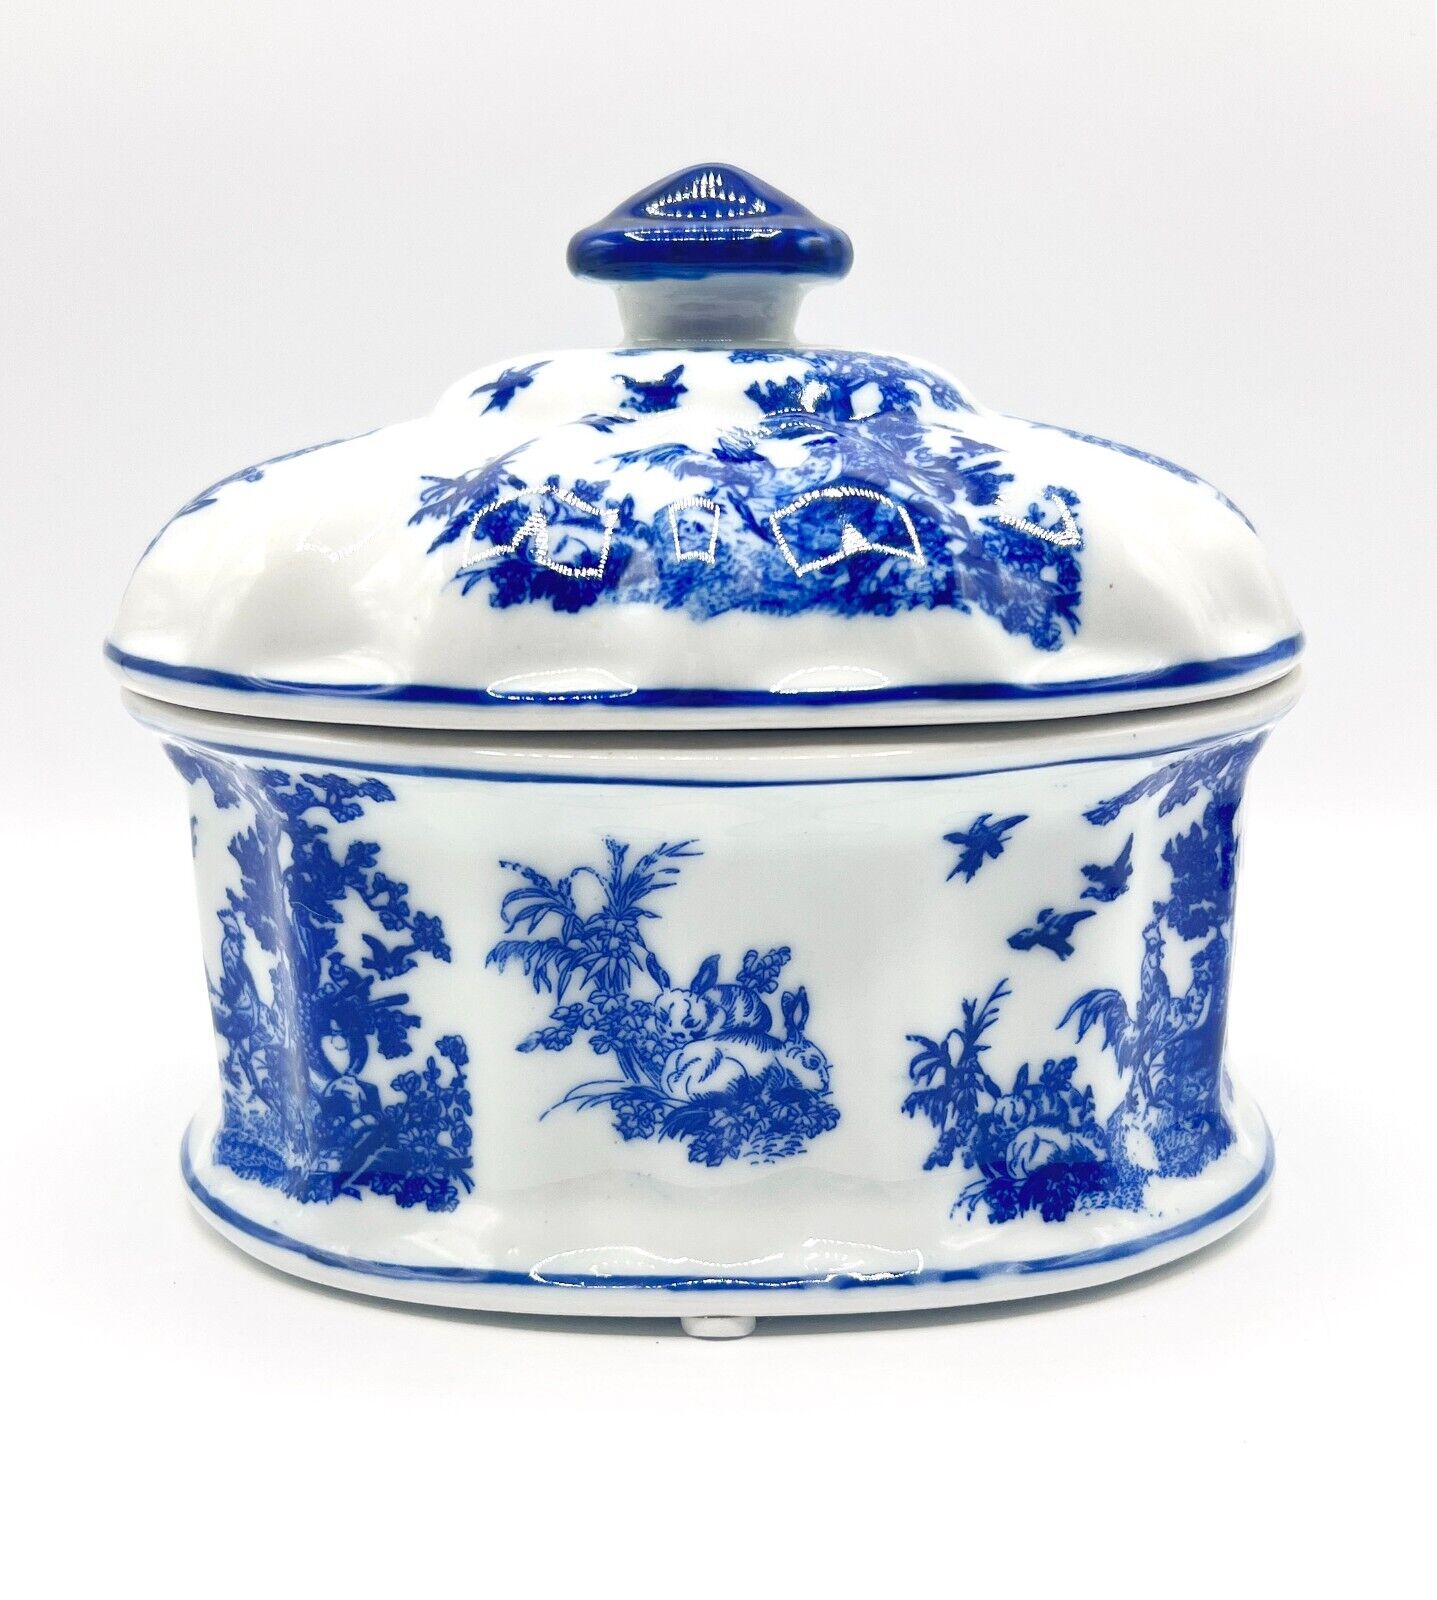 Vintage 1950s De Chang Tao Ci Blue & White Rooster Porcelain Small Lidded Tureen